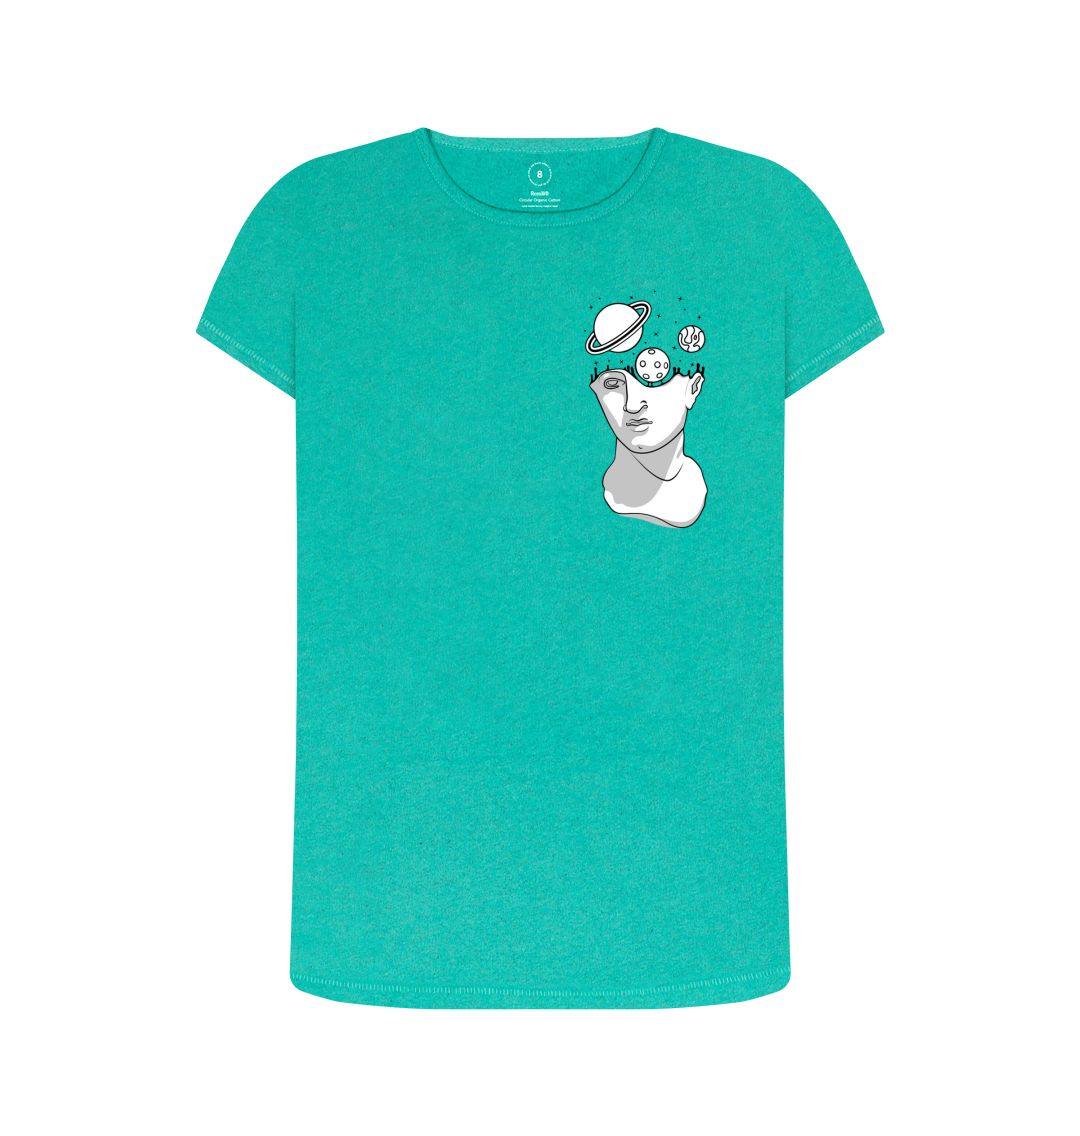 Light Sea Green Do Space Sentient Beauty Fashions Recycled Printed T-Shirt